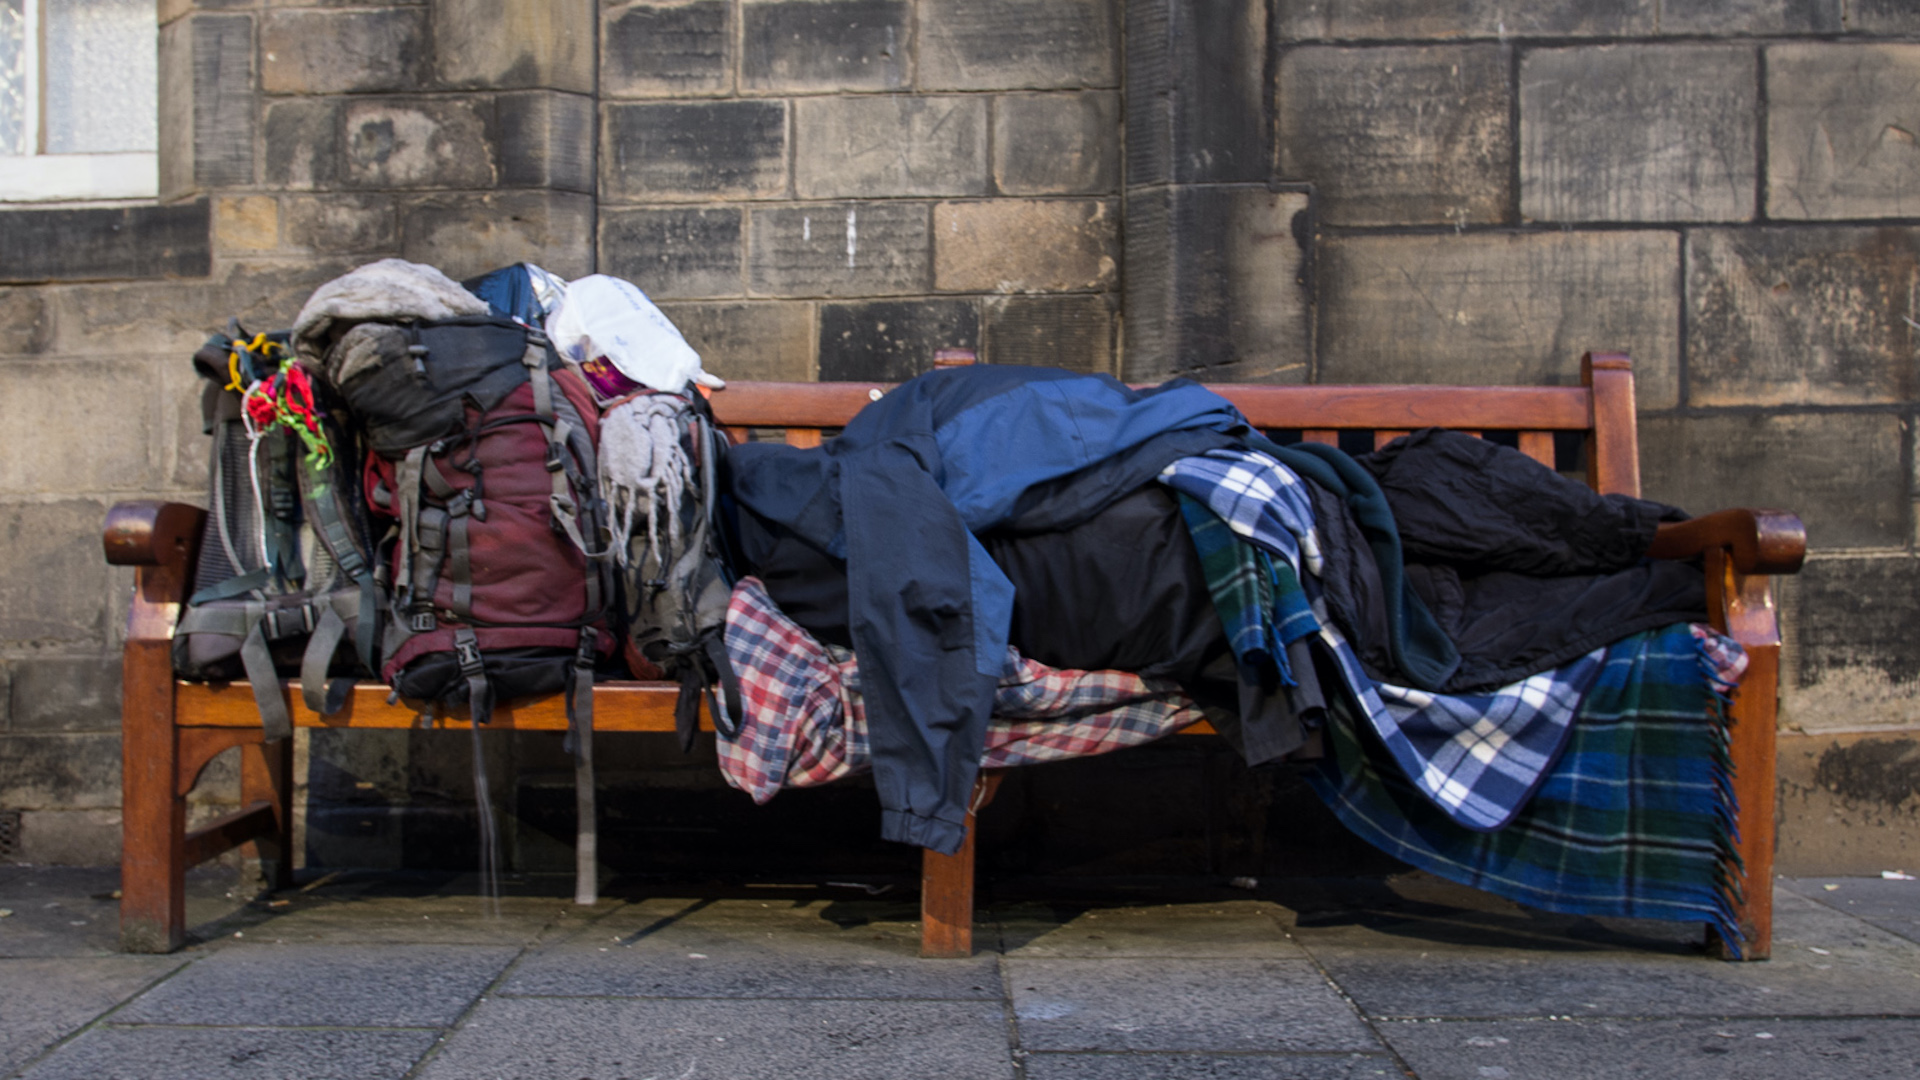 Before the pandemic more than 700 people were sleeping rough per night in Scotland. homelessness